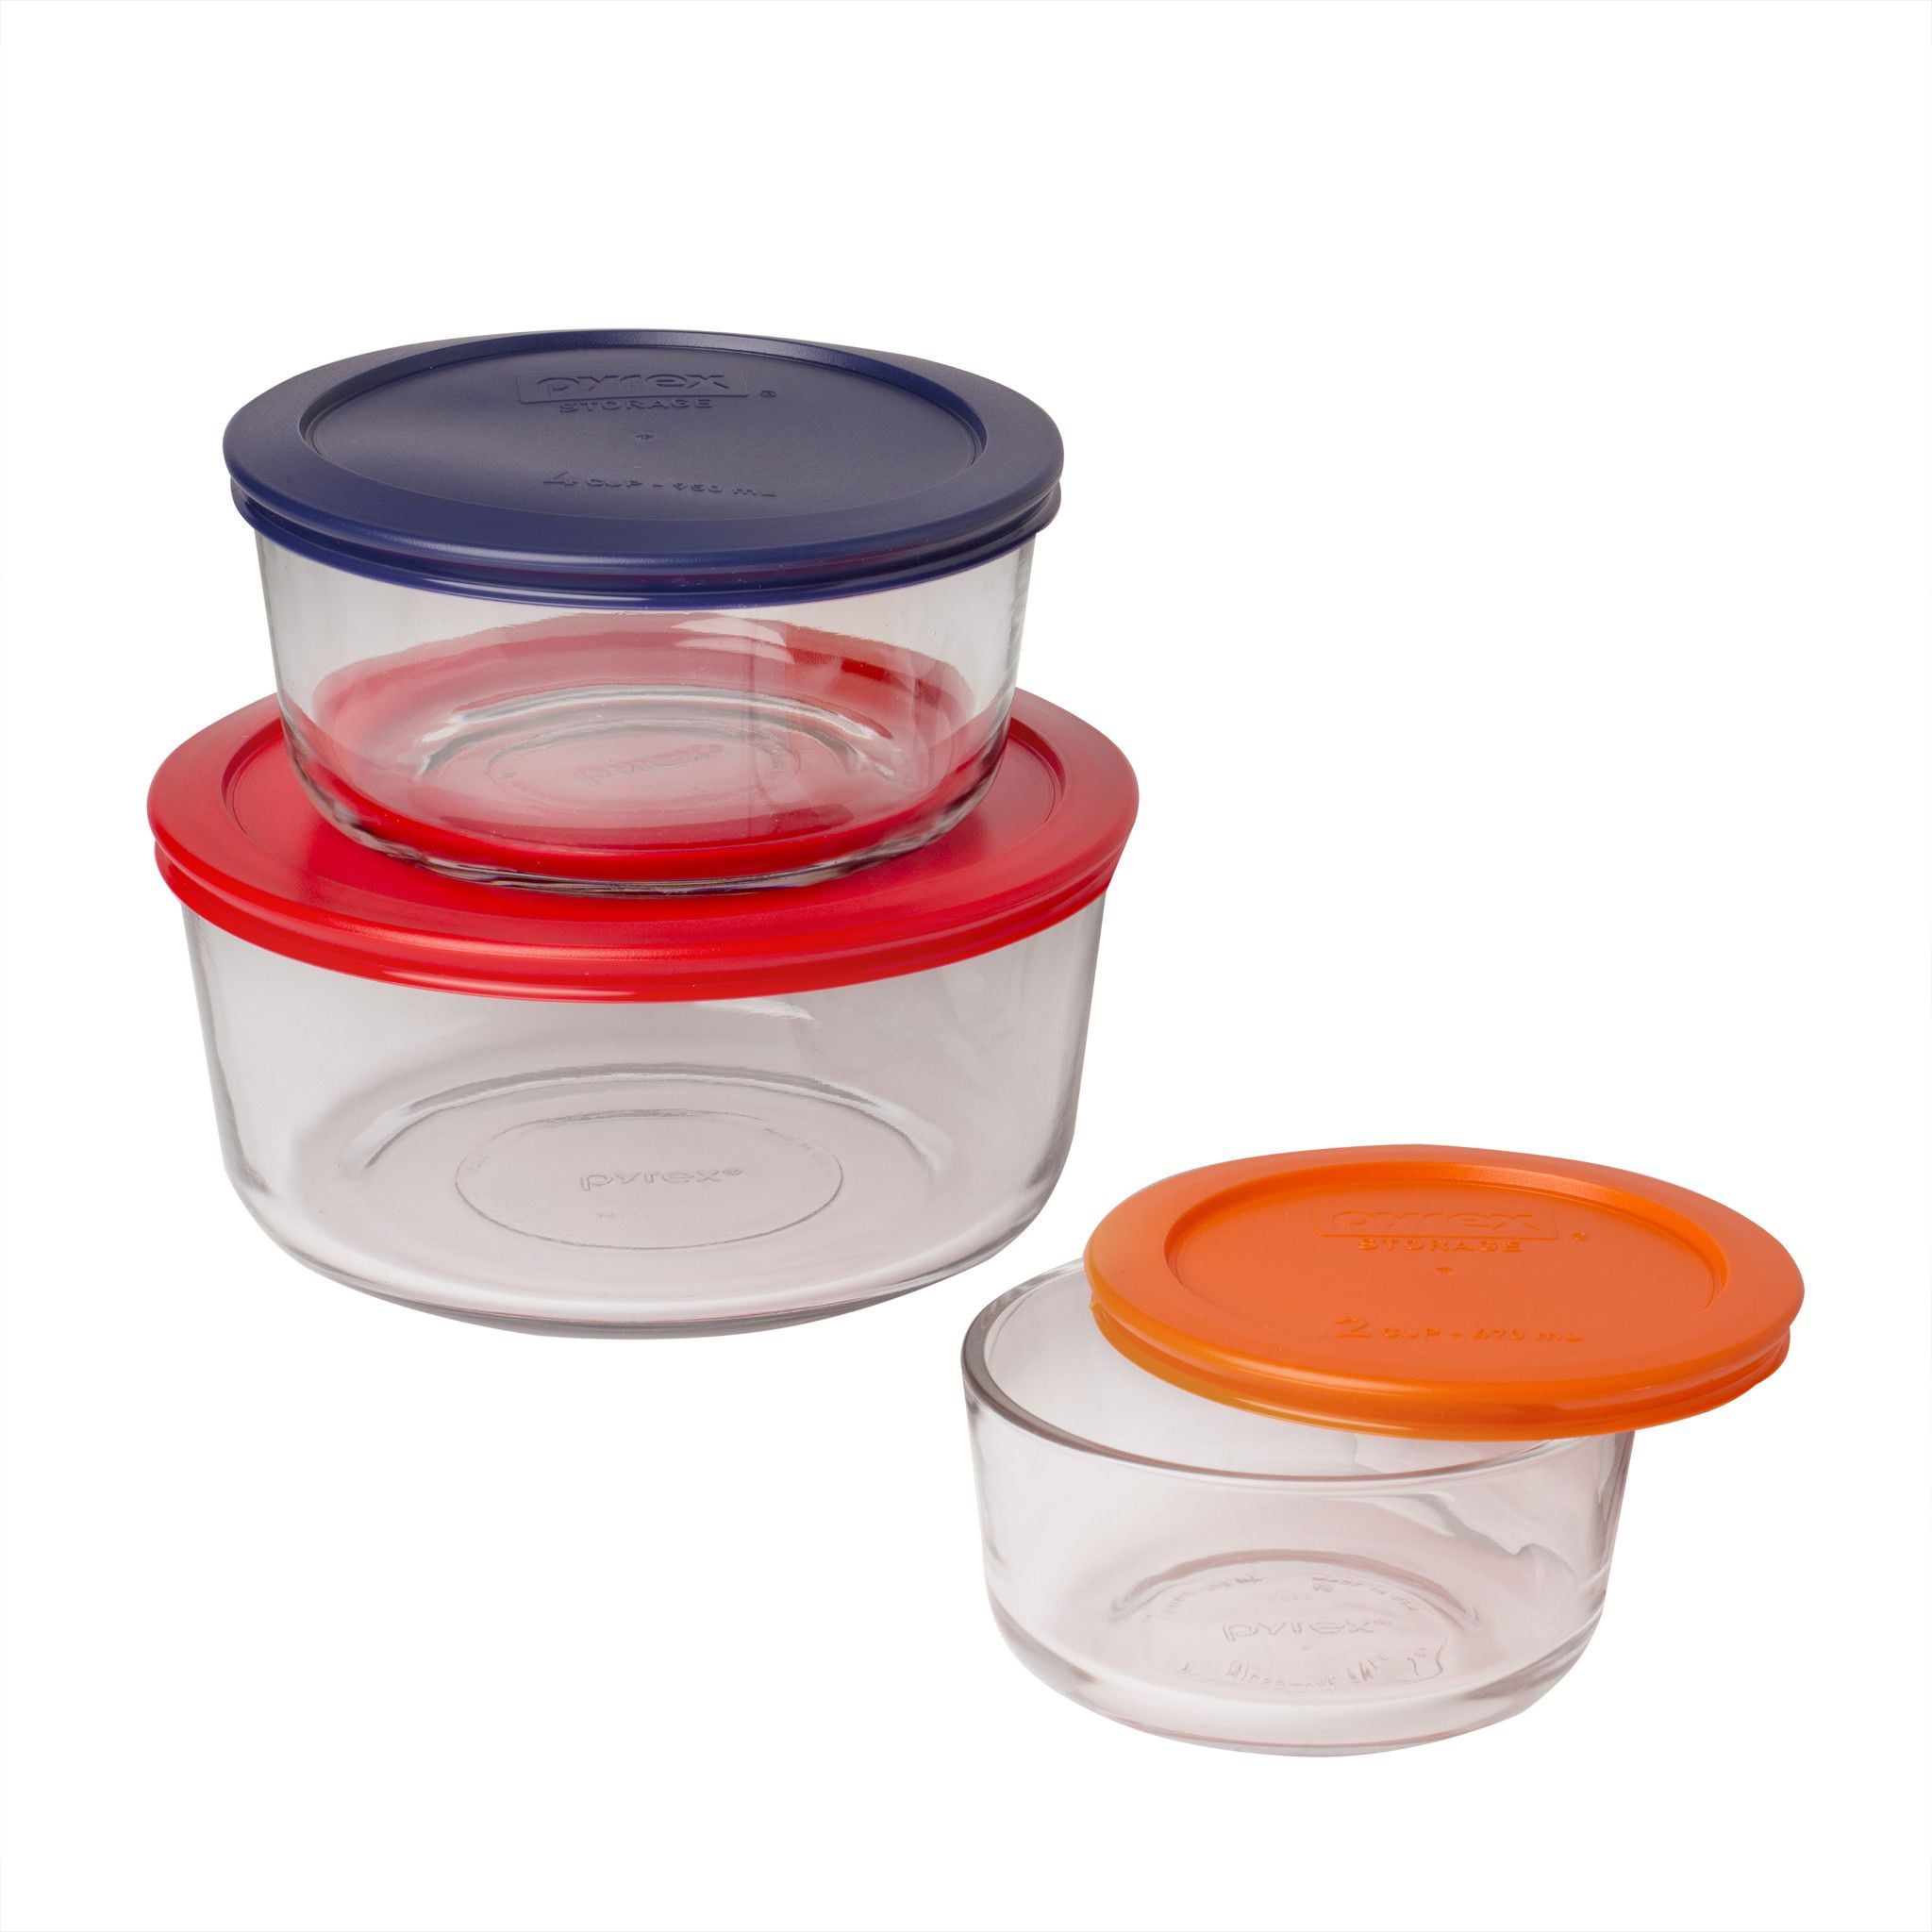 Pyrex Simply Store 6-Piece Glass Bakeware Set Value Pack